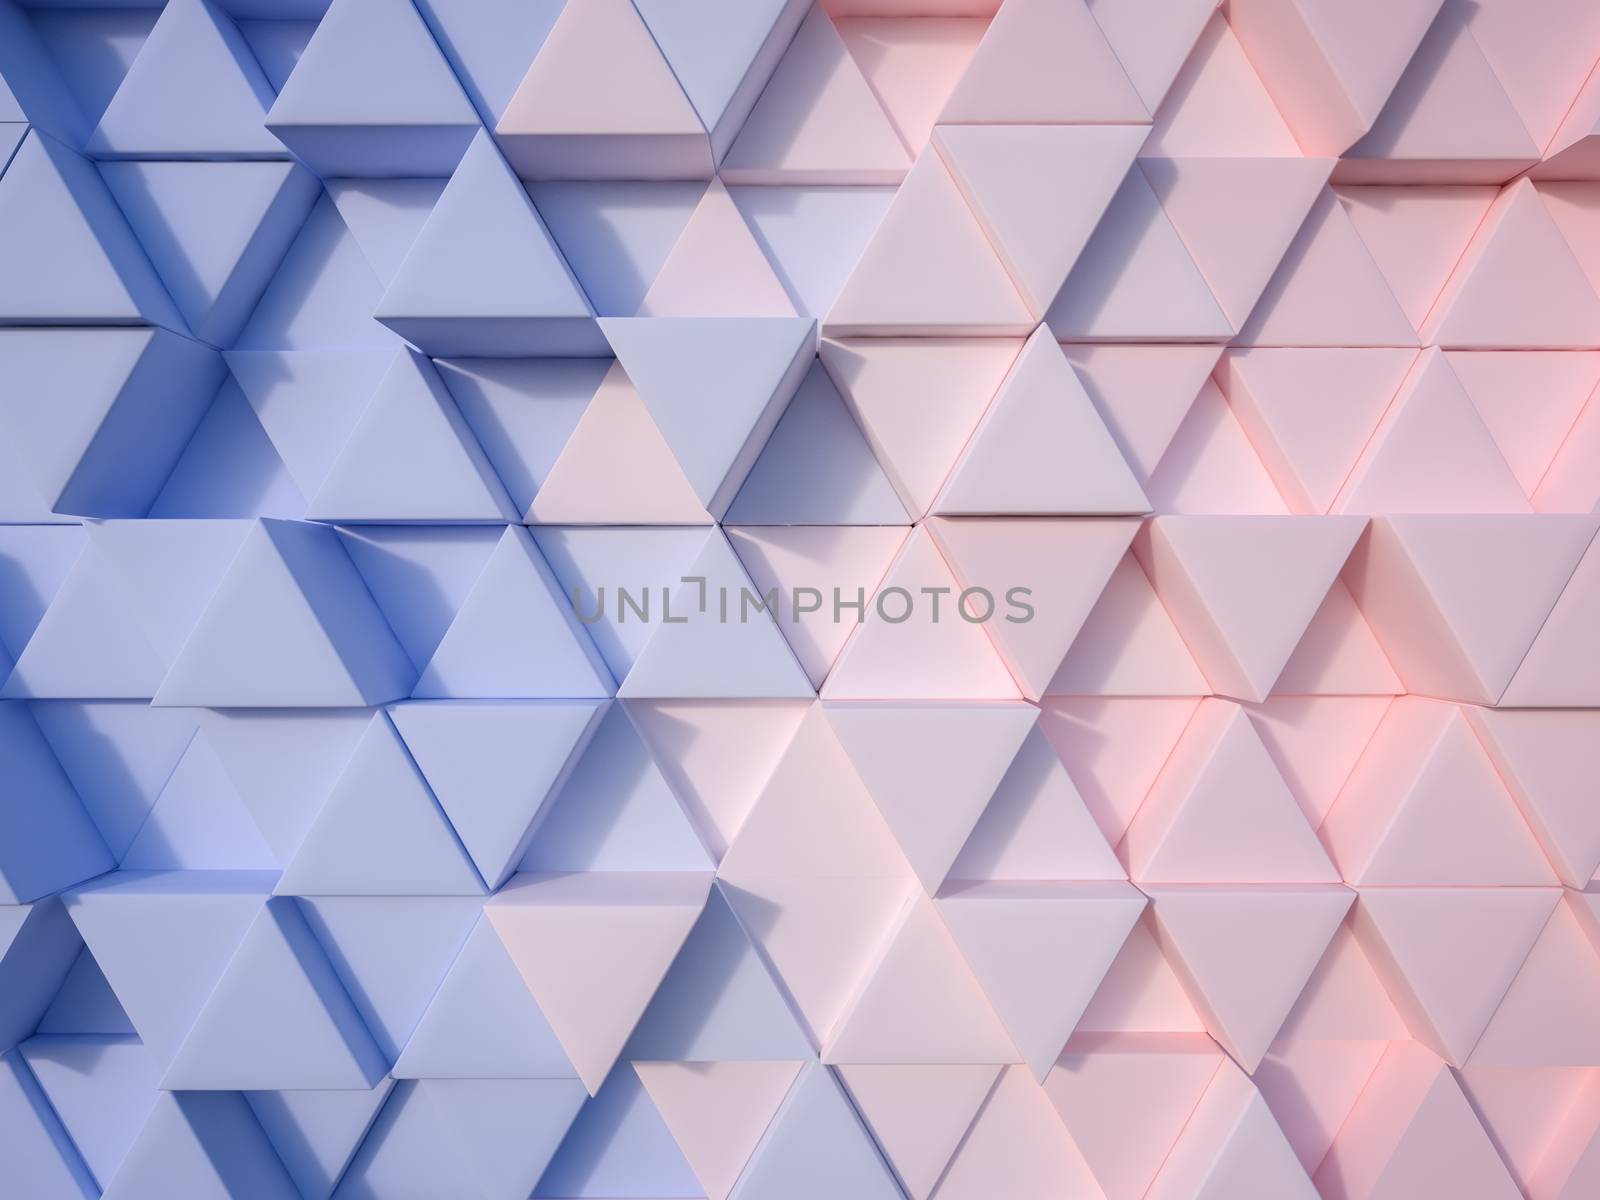 Serenity Blue and Rose Quartz  abstract 3d triangle background